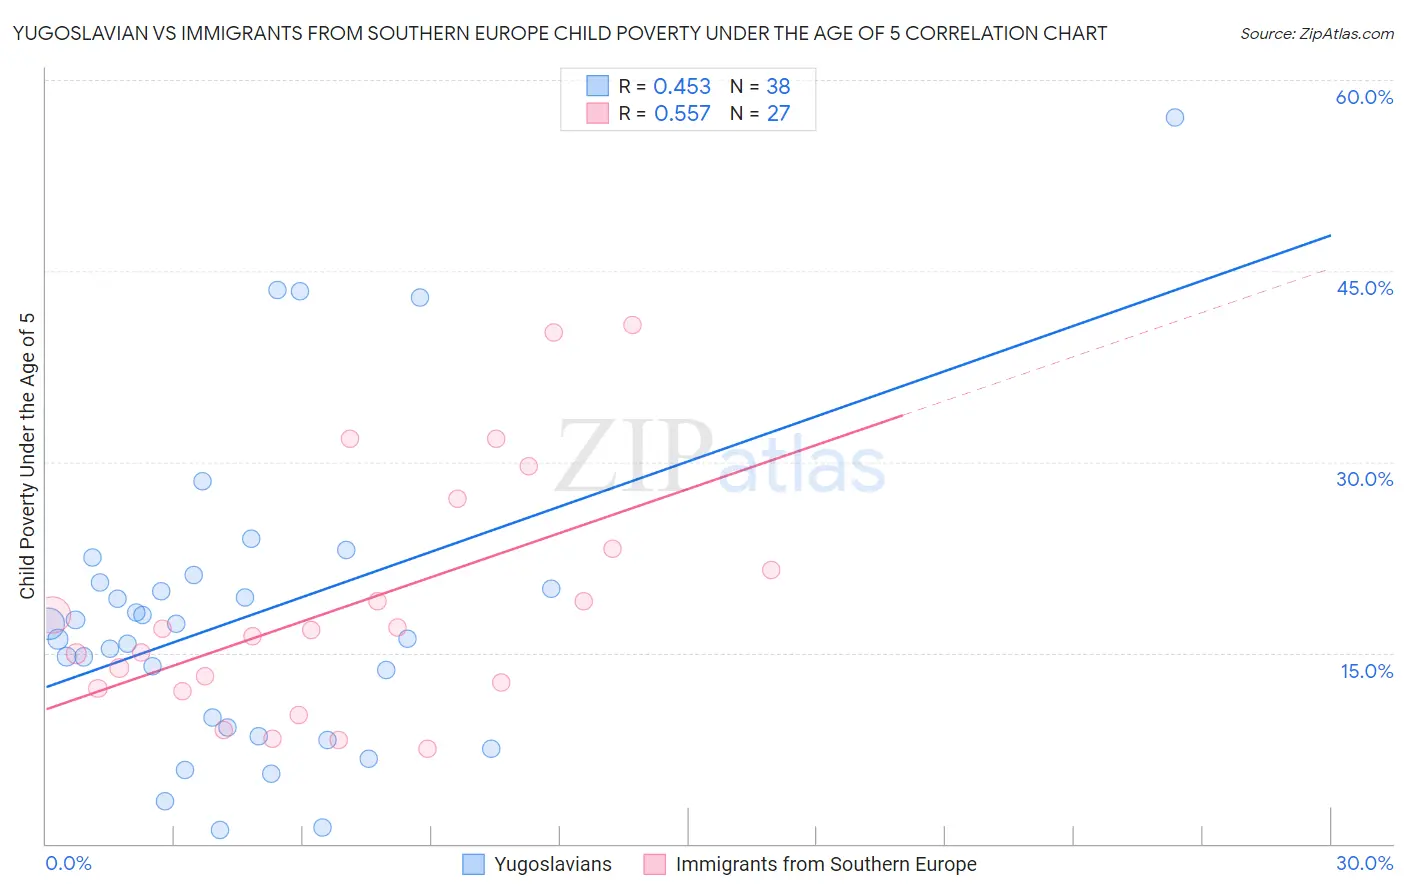 Yugoslavian vs Immigrants from Southern Europe Child Poverty Under the Age of 5